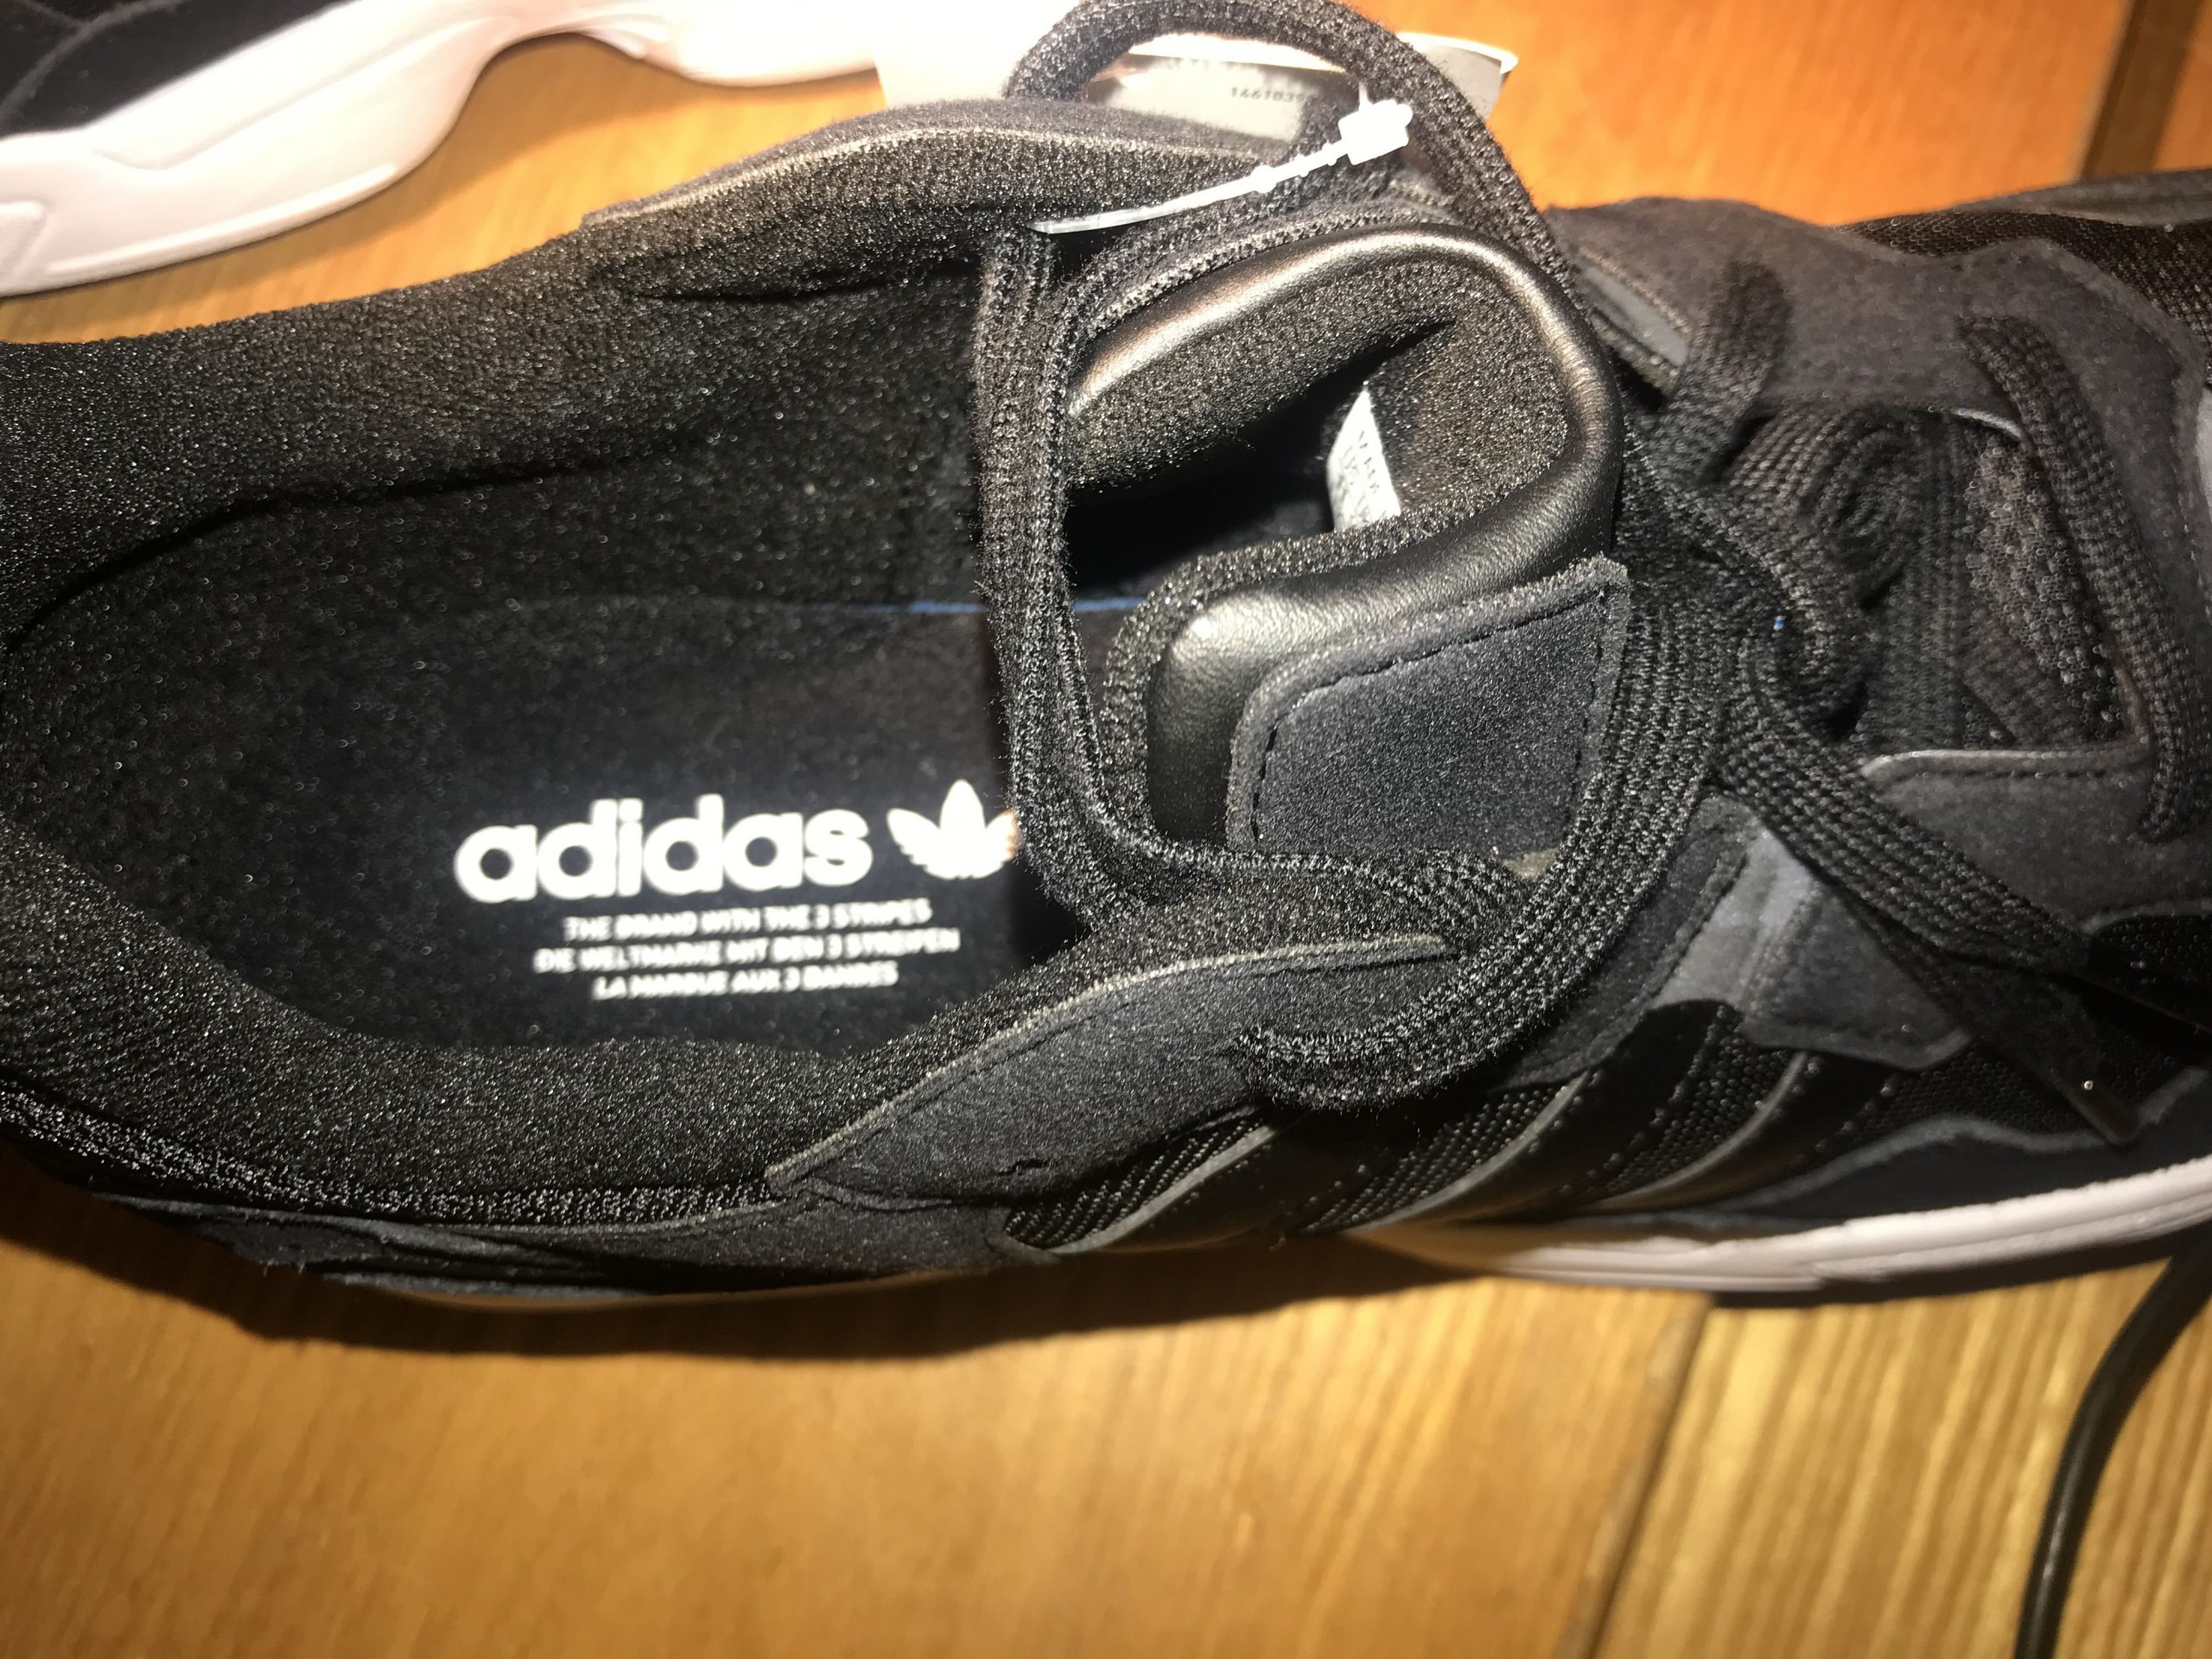 Picture of the inside of the adidas trainers showing the adidas label